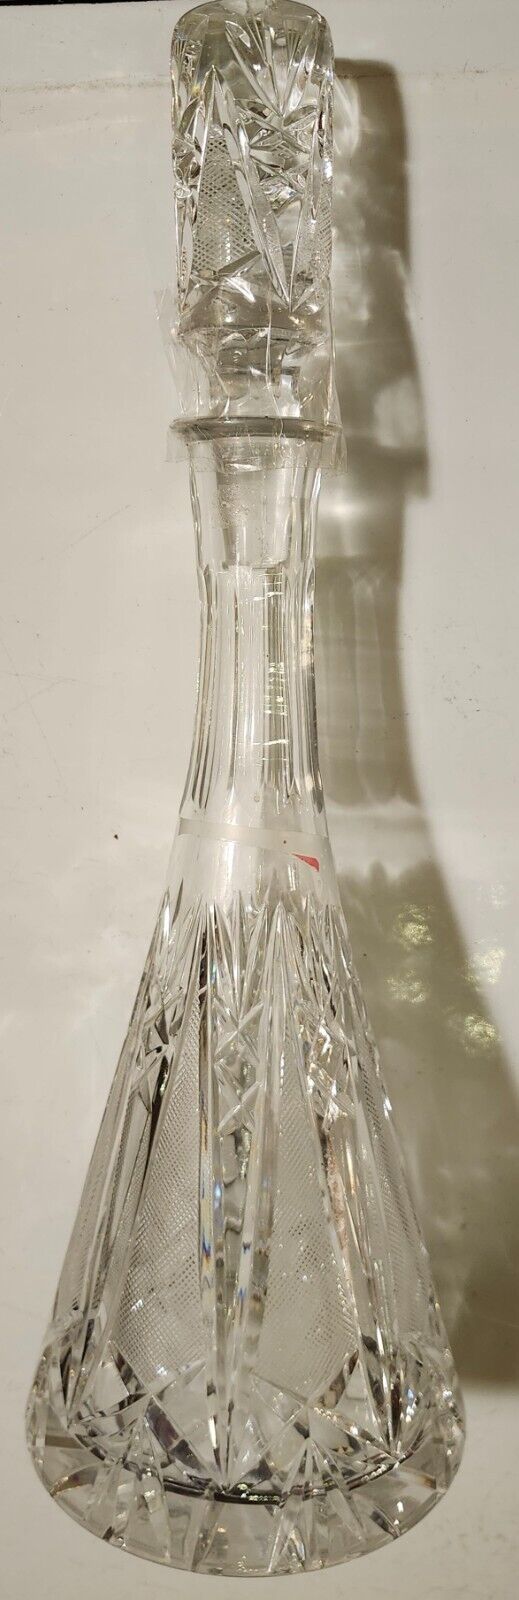 1920'S Vintage French Glass Decanter